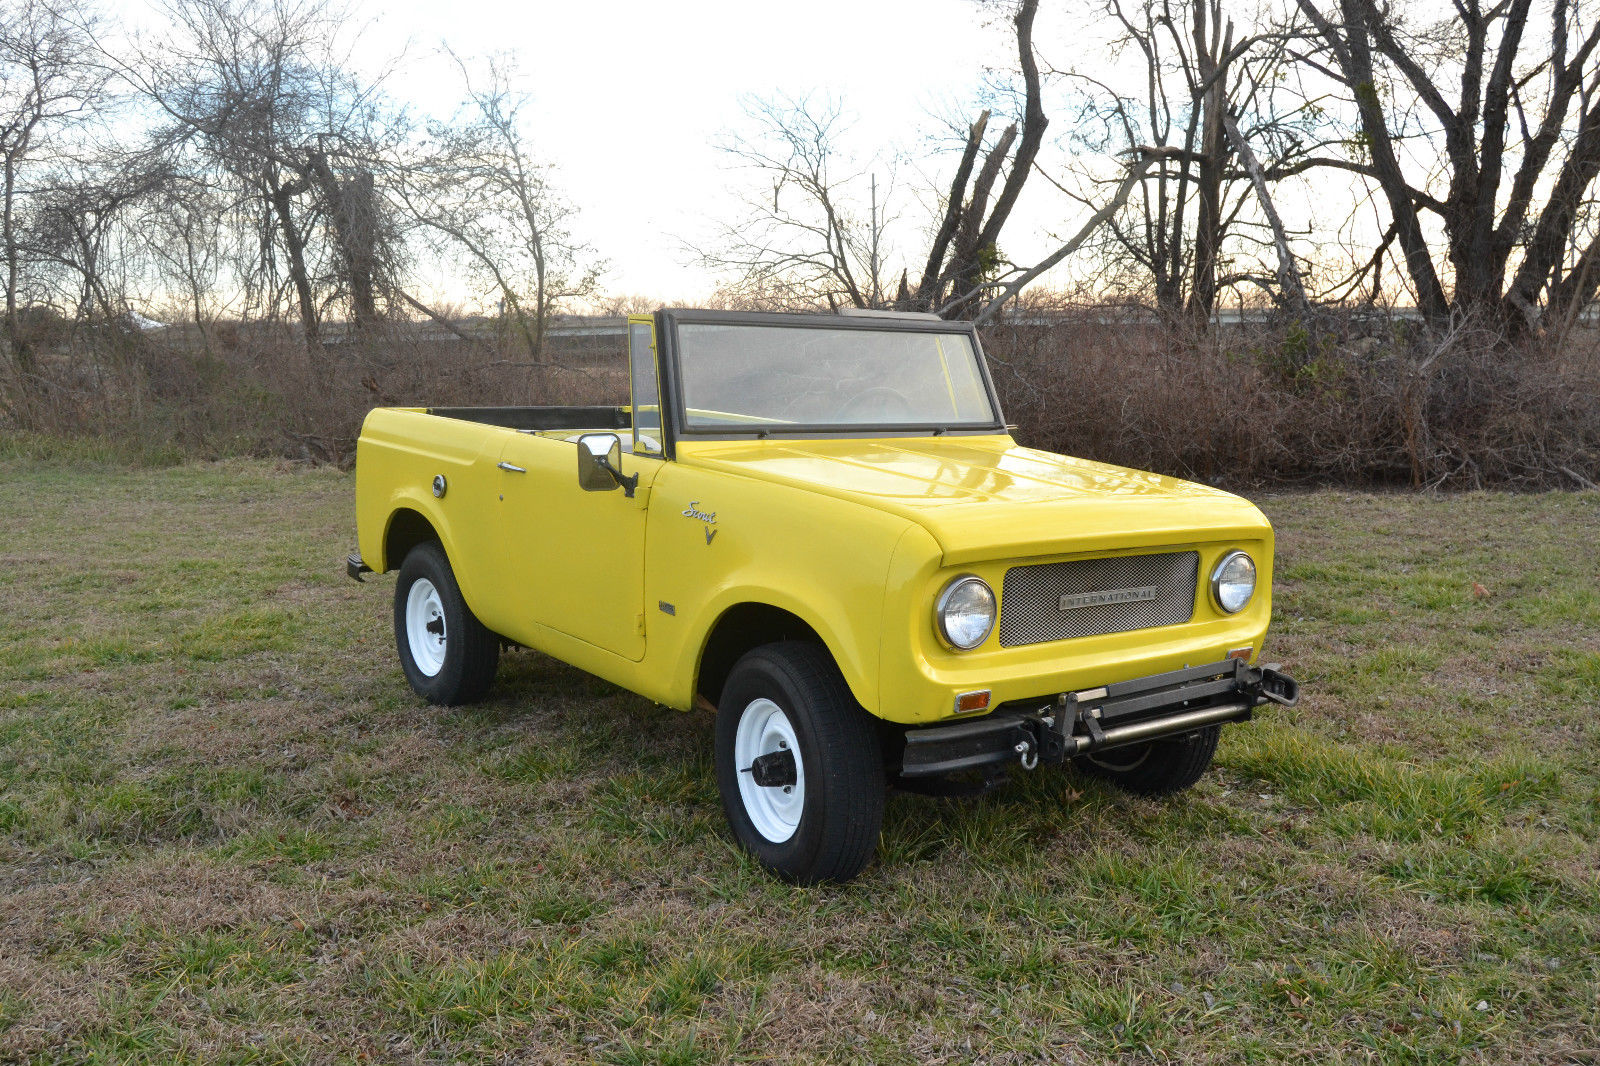 Truck, Yellow, Convertible, 4x4, Bronco, Pickup, V8, Classic, Vintage, Mudder - Classic ...